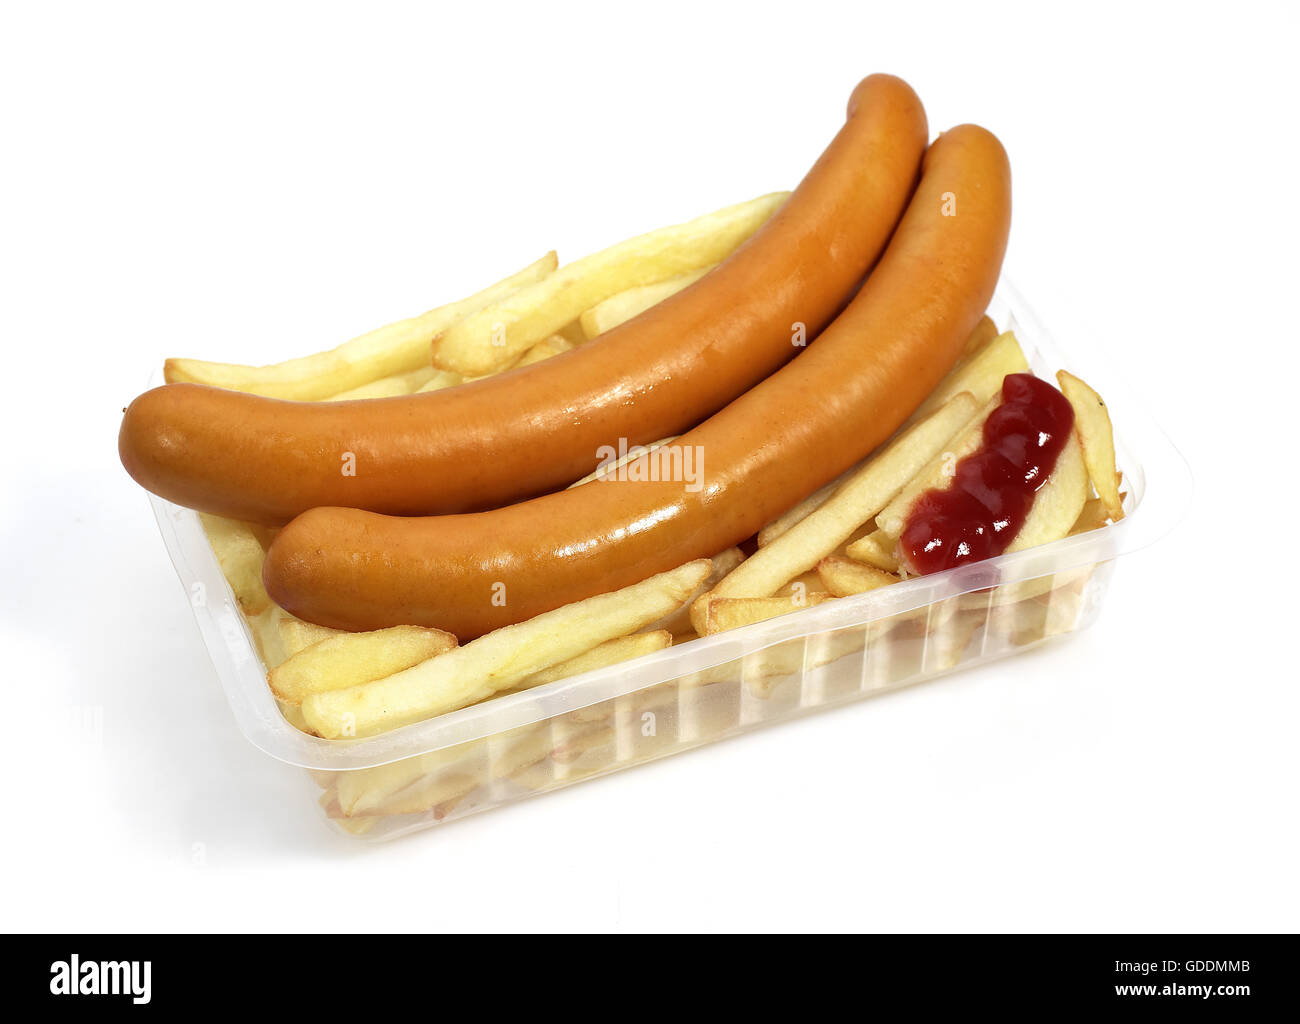 Strasburg Sausages With Ketchup and French Fries against White Background Stock Photo